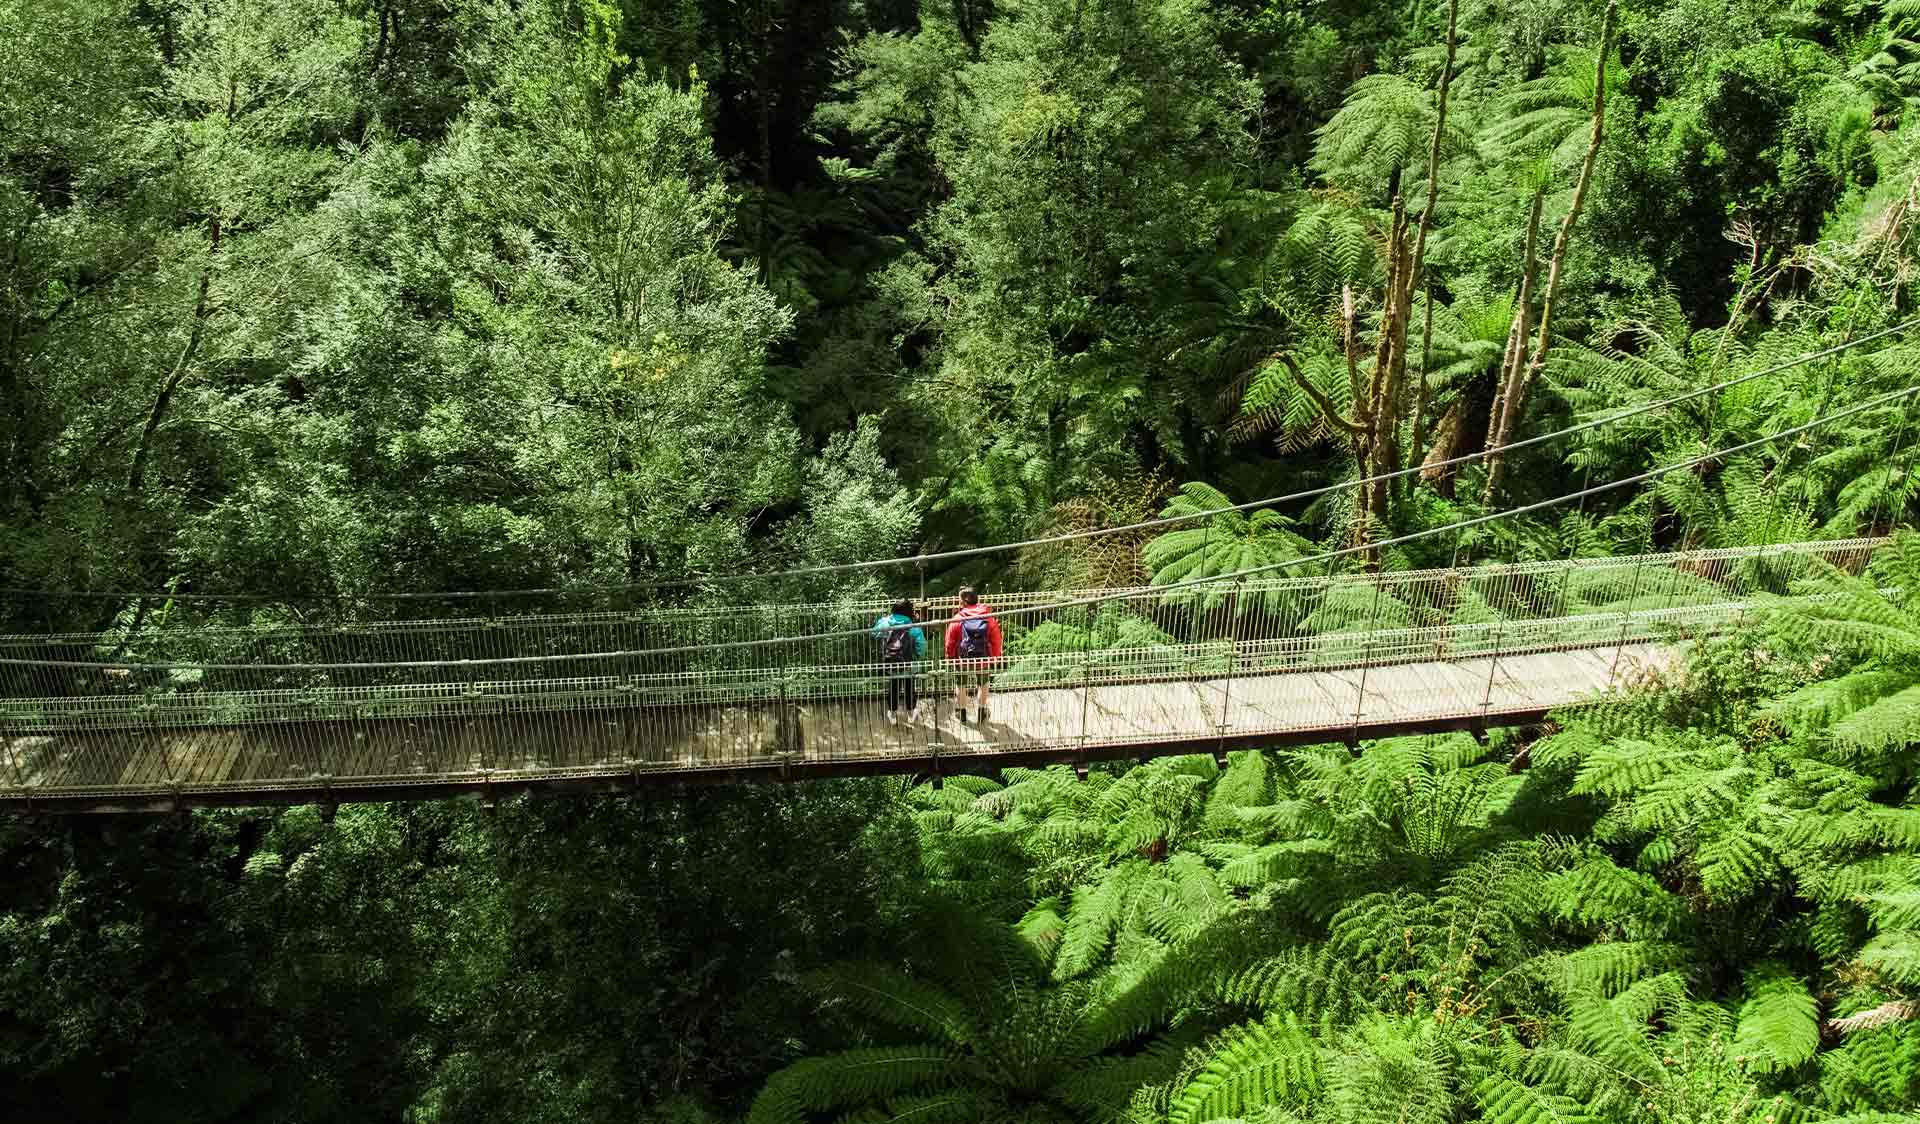 Two people stop and take in the view from the Corrigan Suspension Bridge at Tarra-Bulga National Park.